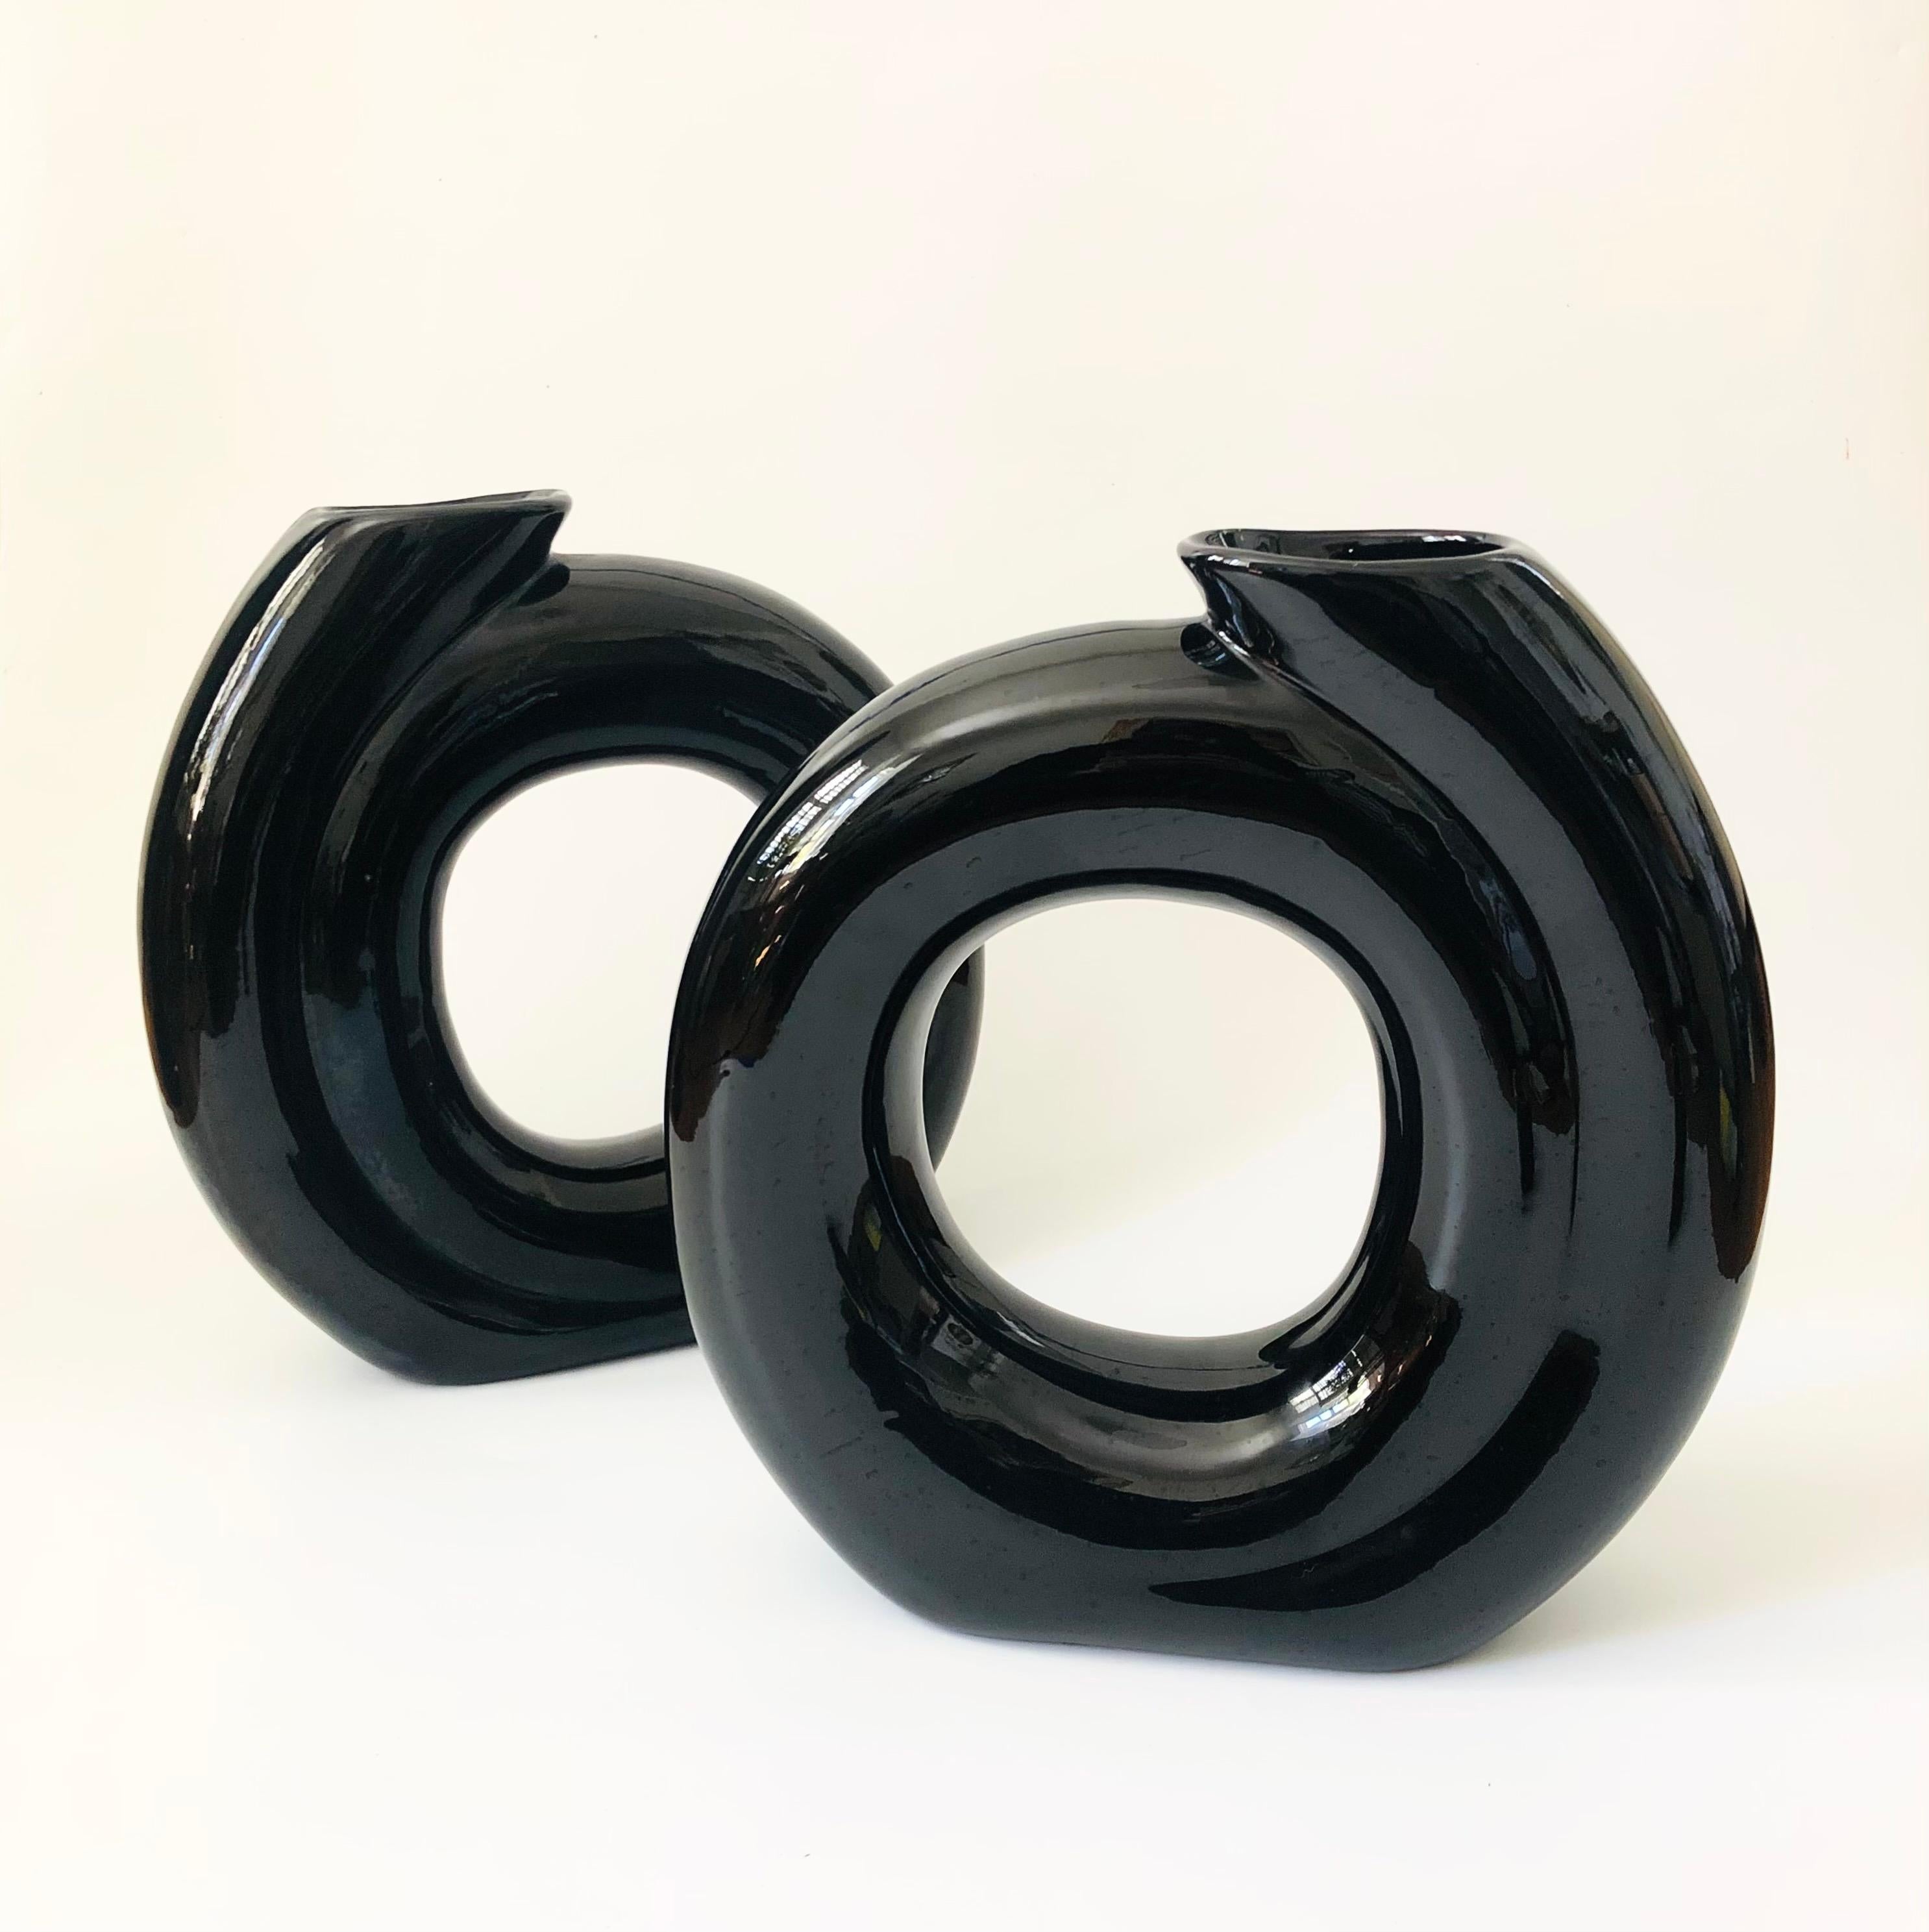 A large postmodern ceramic vase. Sculptural circular embossed shape, finished in a glossy black glaze. A nice large statement pieces. 2 are available to sale separately.

